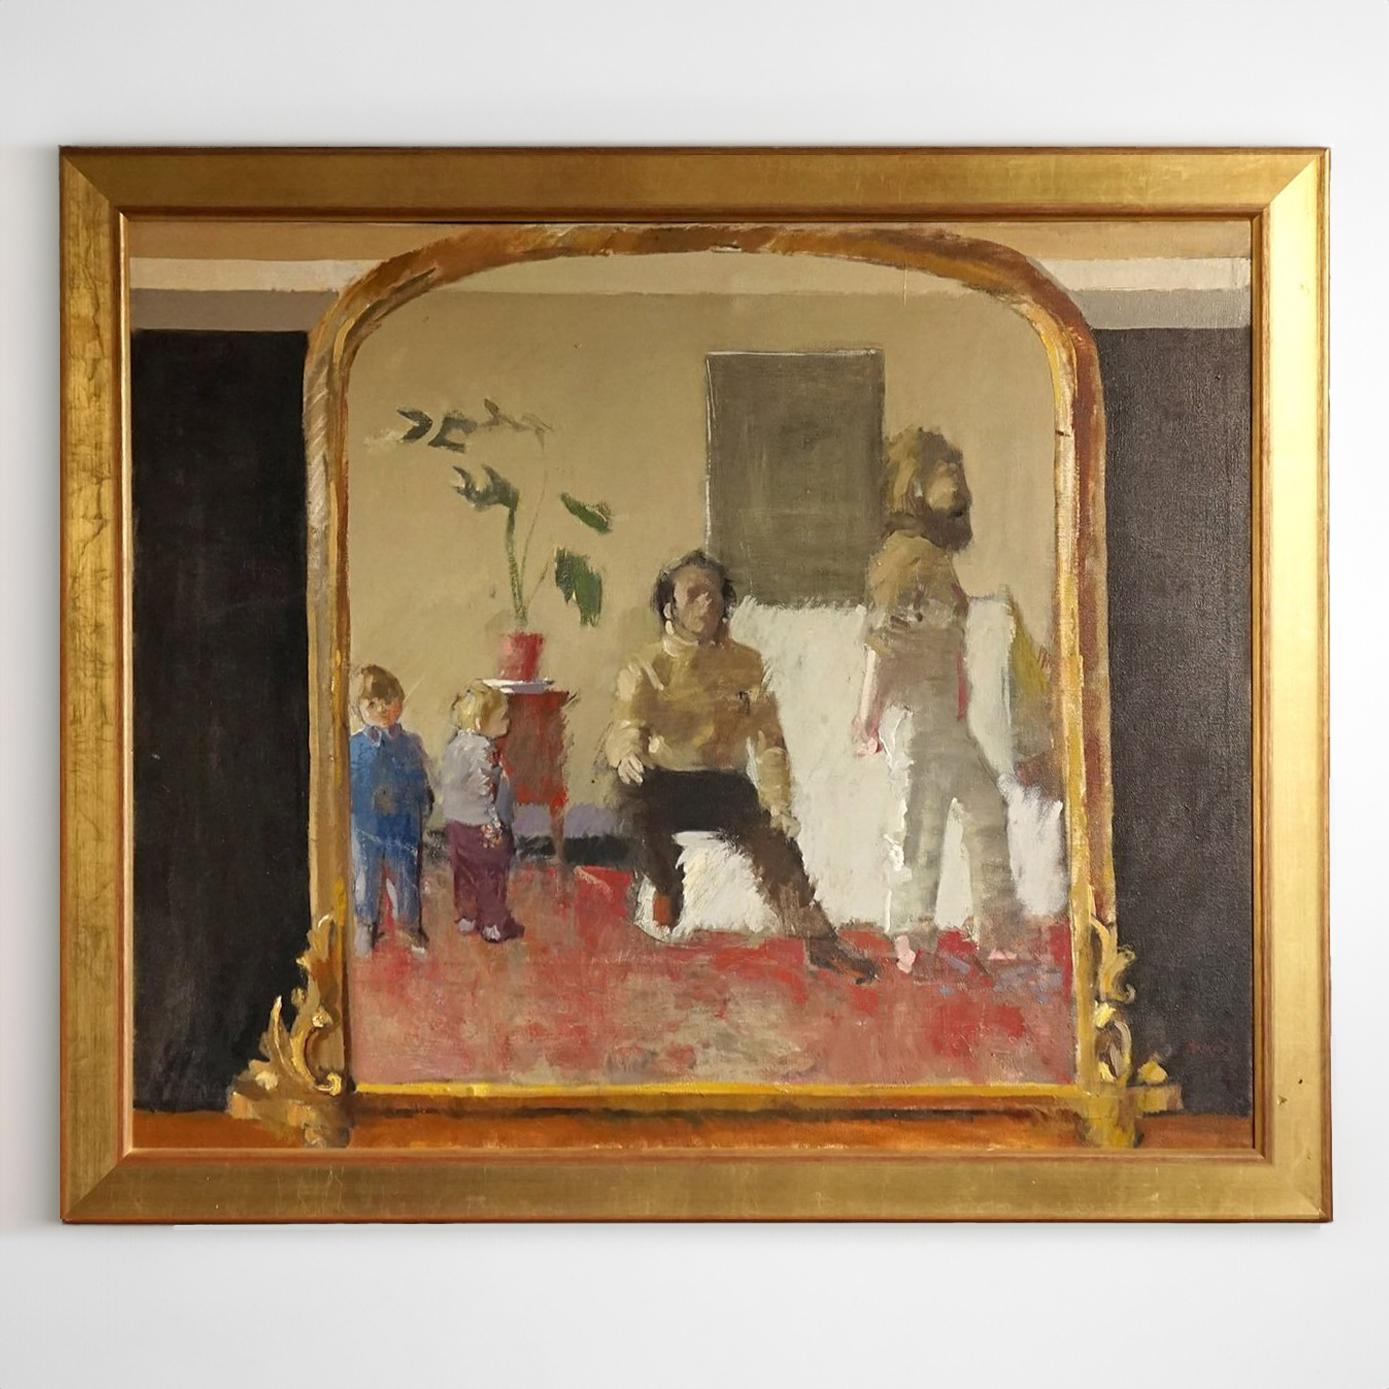 Original Oil on Canvas Painting ‘Wife and Family’ 1970 by John G. Boyd R.P. R.G.I. Scottish (1940-2001)

A thoroughly charming painting depicting the artist and his family in the reflection of their gilt overmantle mirror. Due to the slightly